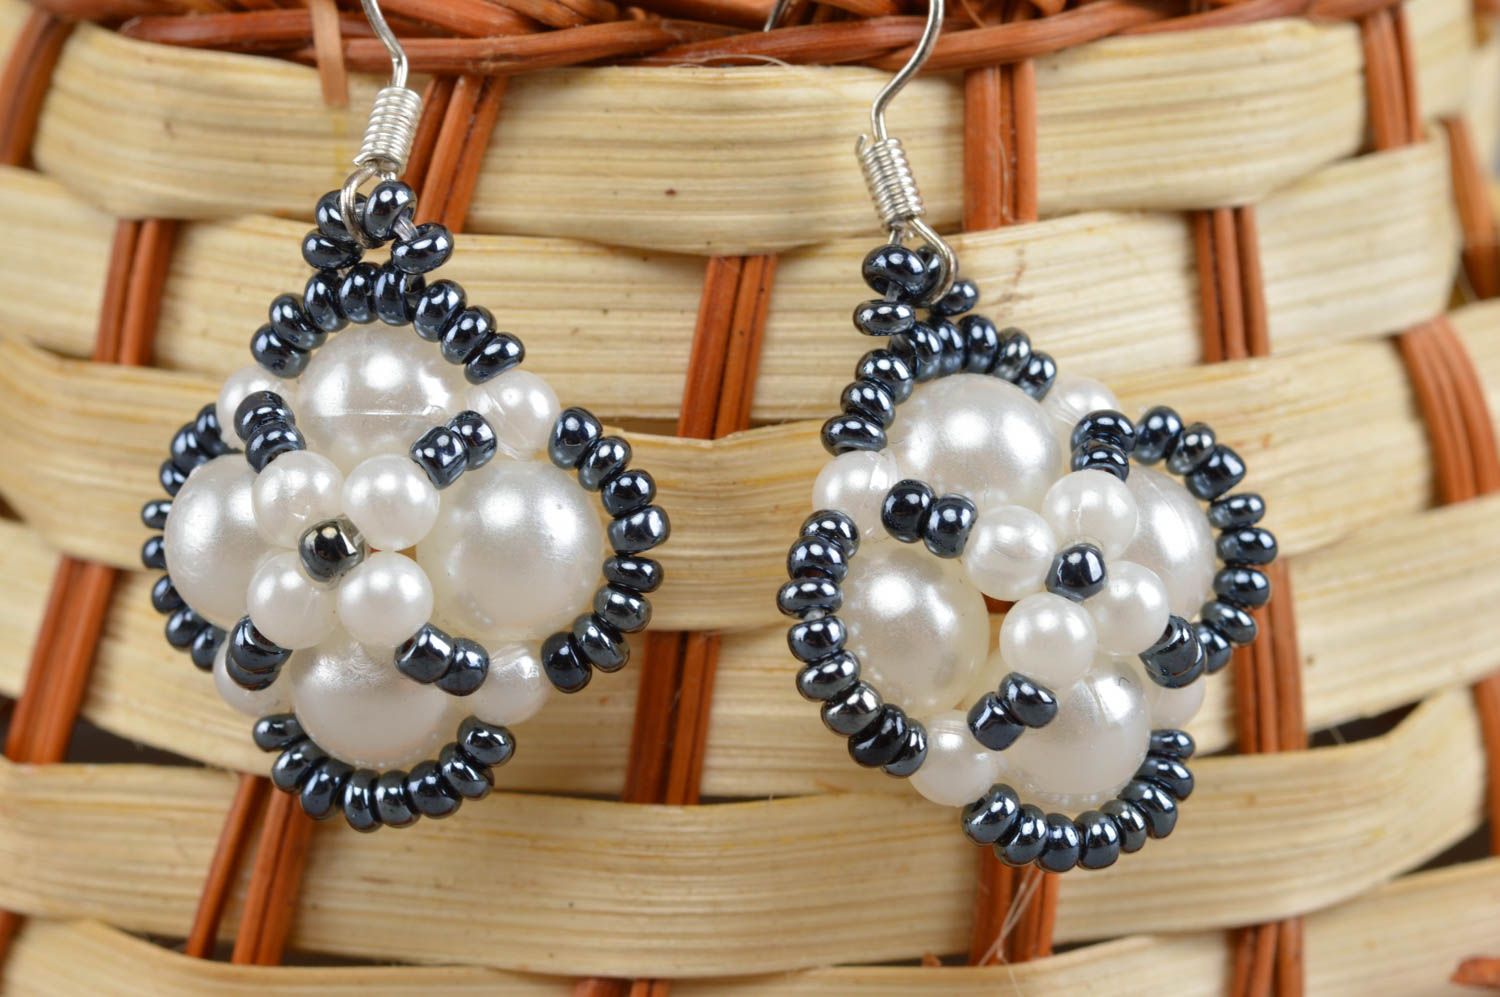 Stylish handcrafted beaded earrings fashion accessories bead weaving ideas photo 1